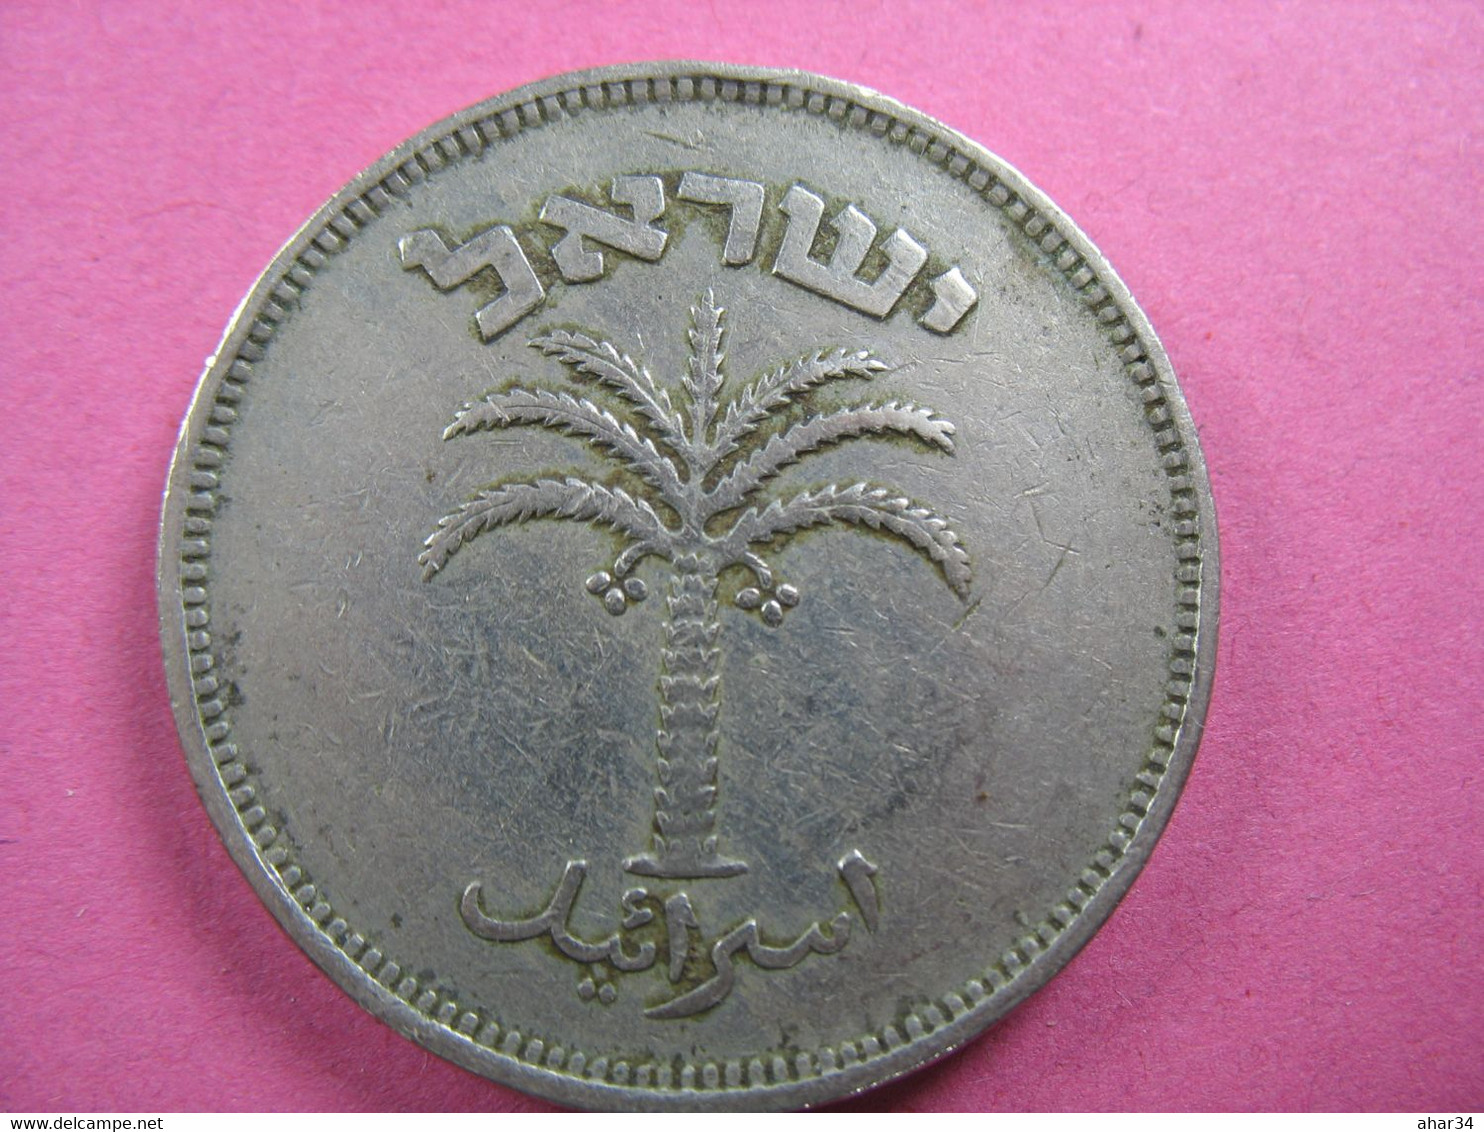 TEMPLATE LISTING ISRAEL  LOT OF  200  COINS 100 PRUTA PRUTOT 1949  COIN FREE SHIPPING  BY SURFACE REGISTERED MAIL. . - Otros – Asia